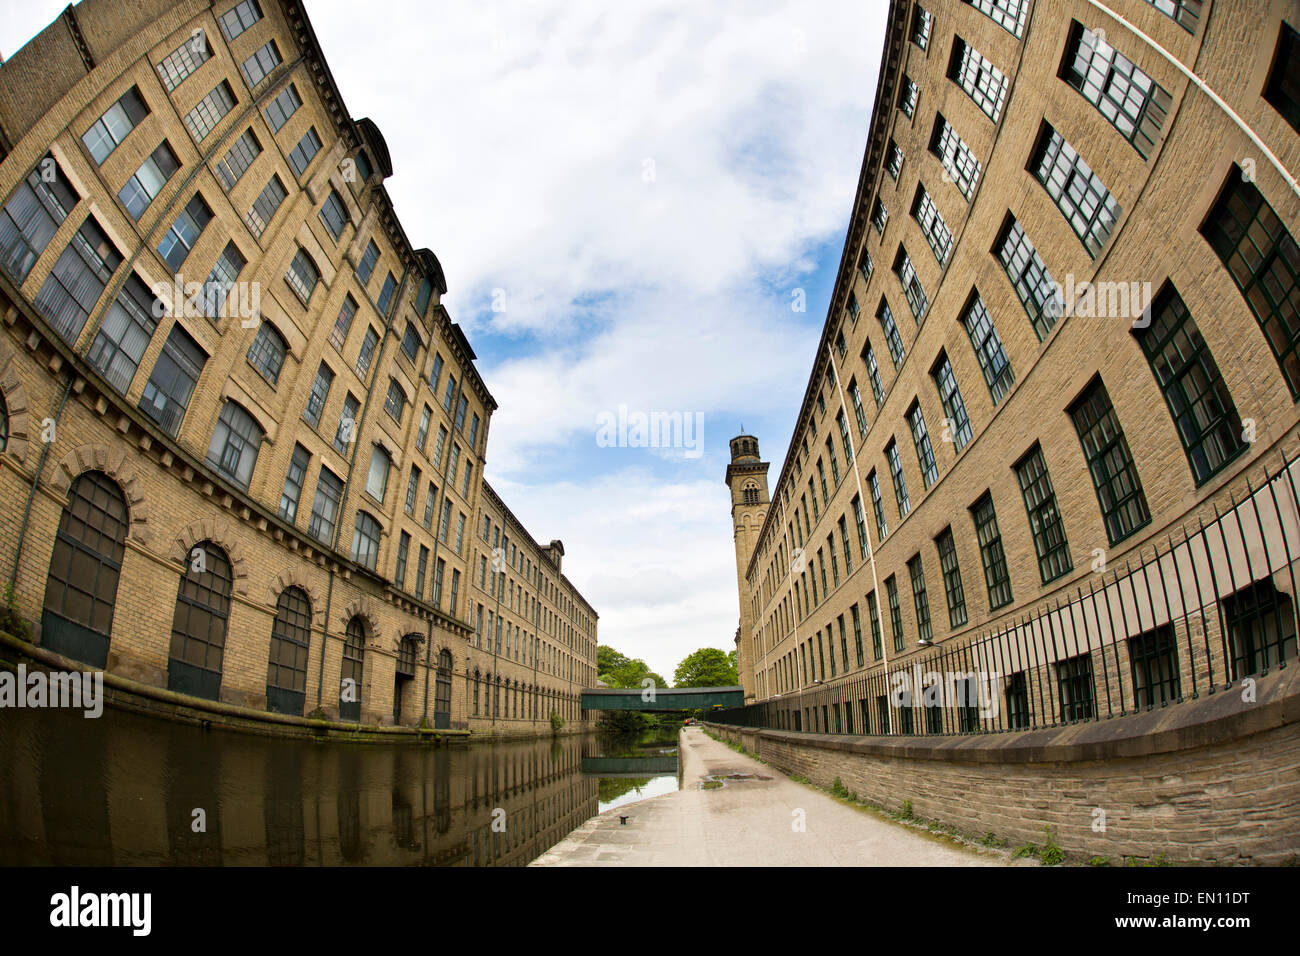 UK, England, Yorkshire, Saltaire, Salts Mills and Leeds and Liverpool Canal, fish eye lens view Stock Photo